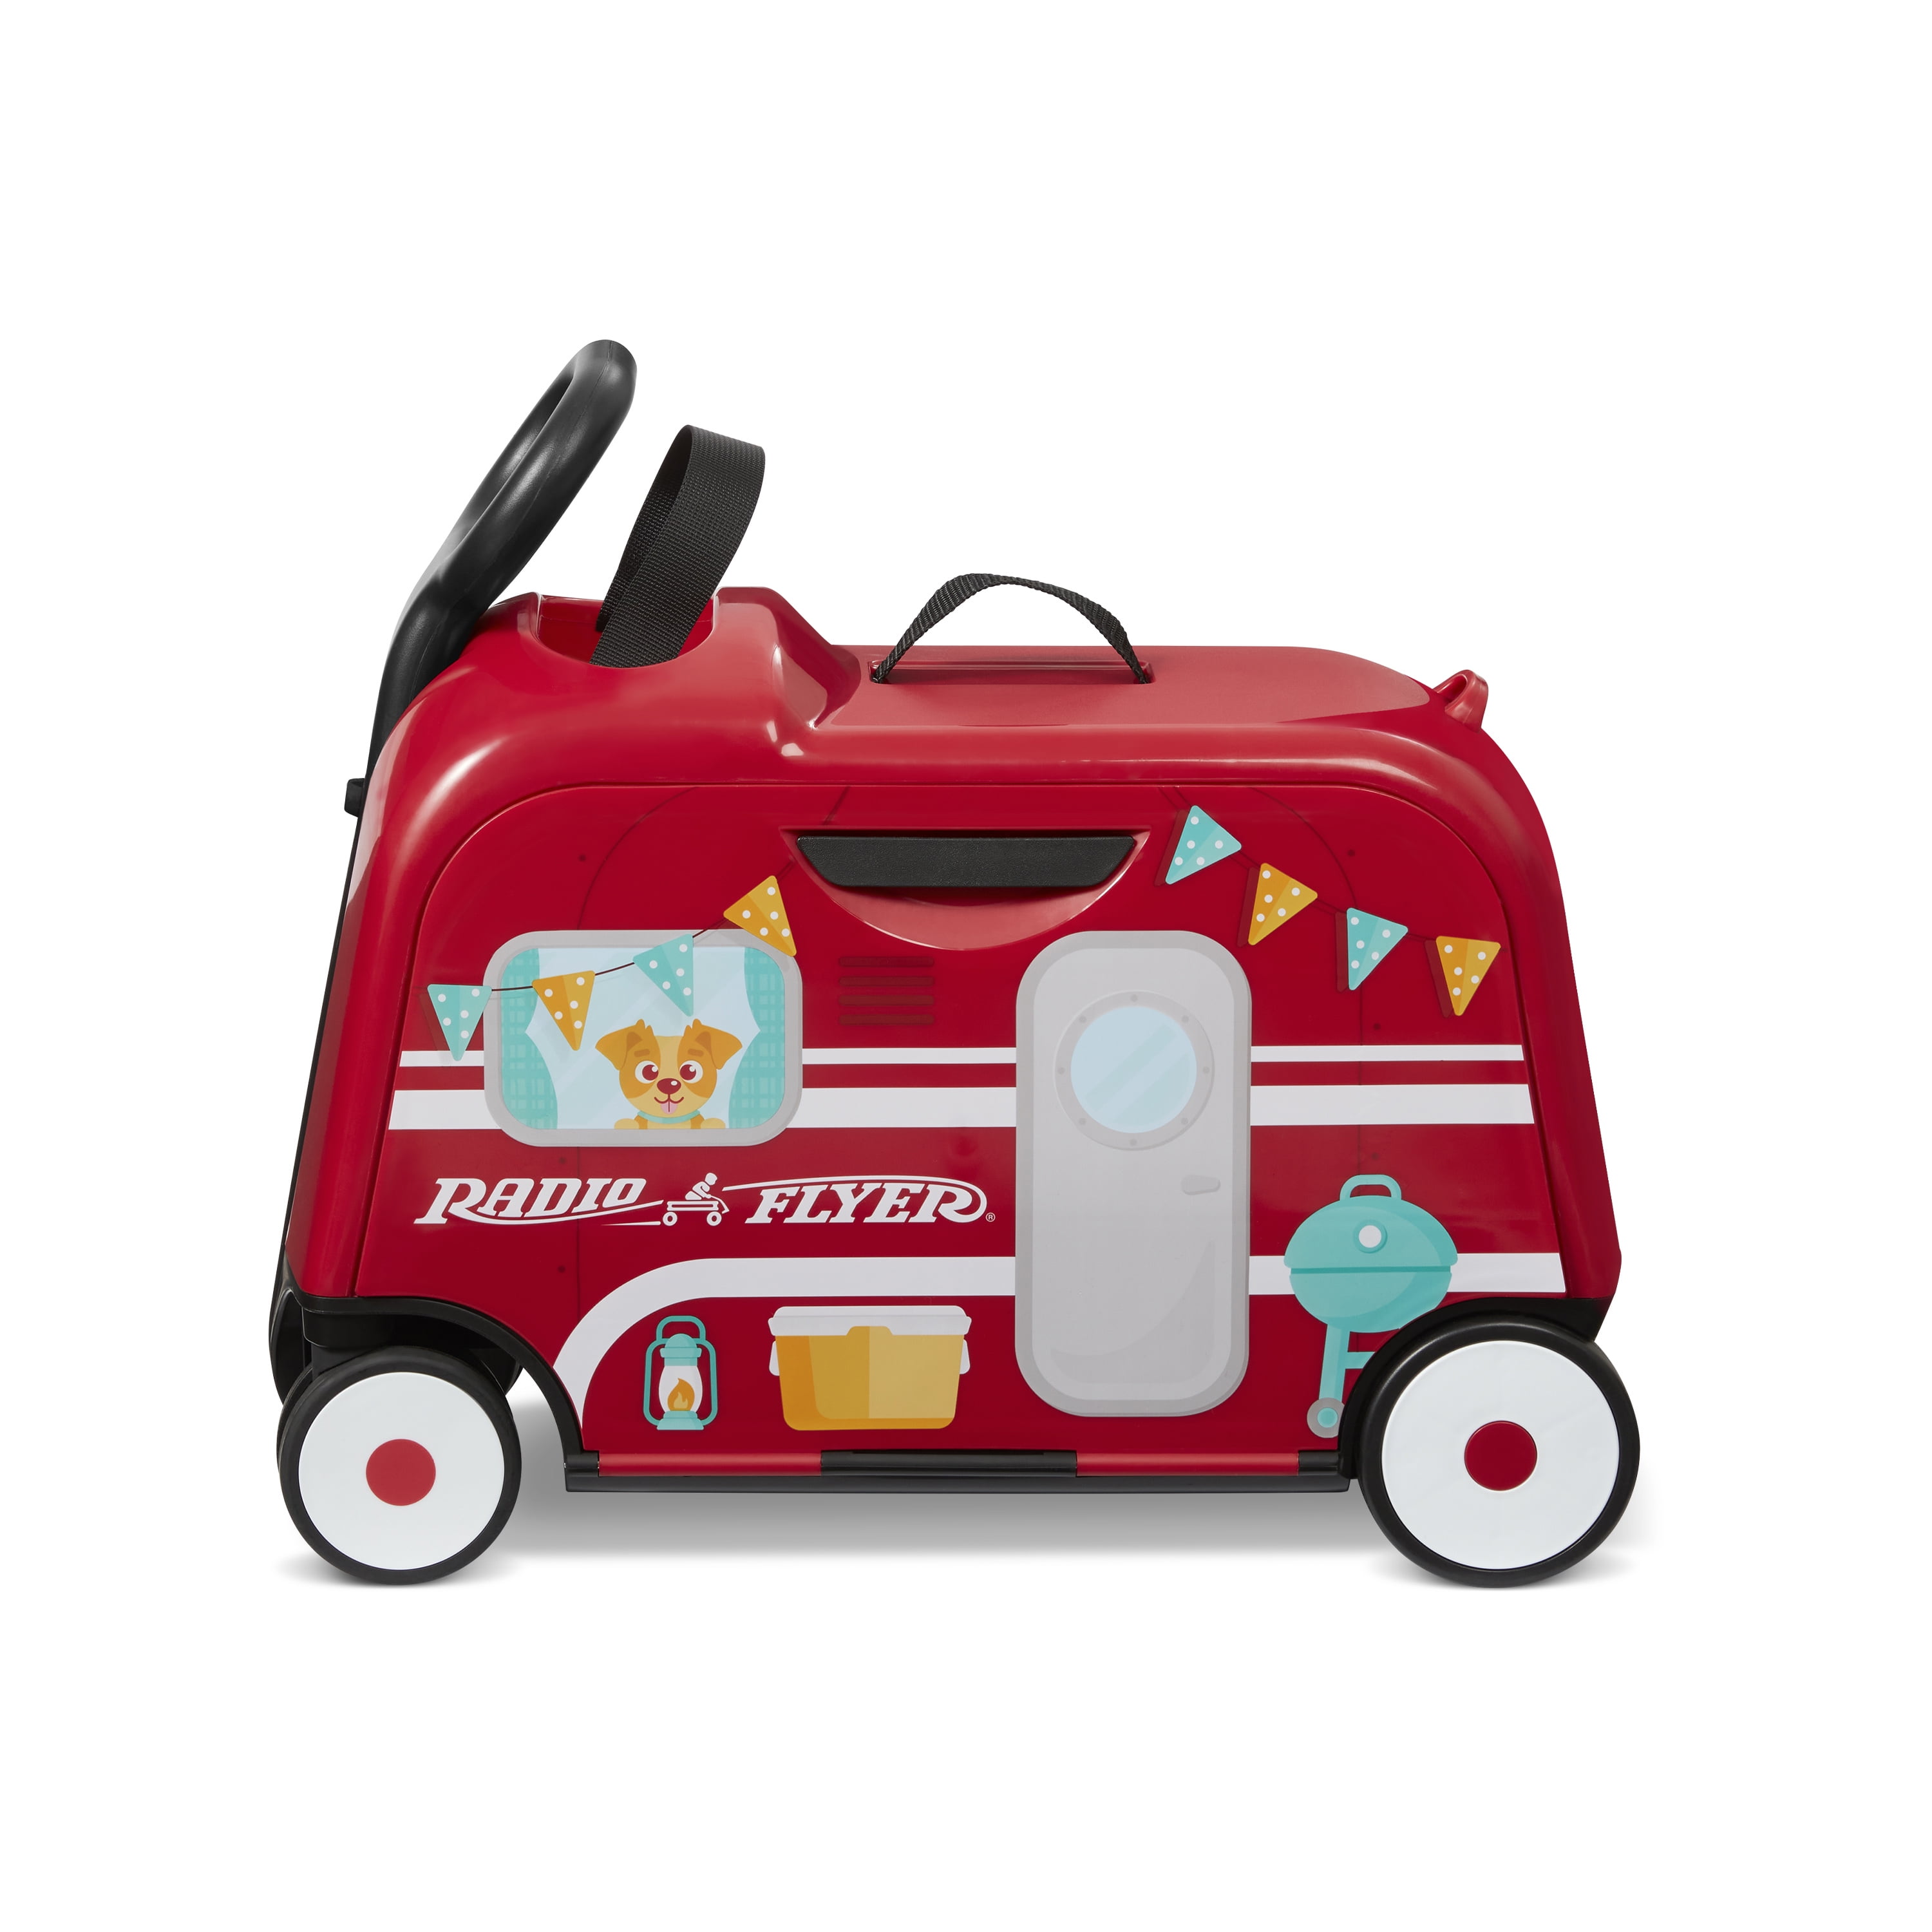 Always at home wherever we roam, Travel trailer, camping, RV personali –  Red Robot Engraving